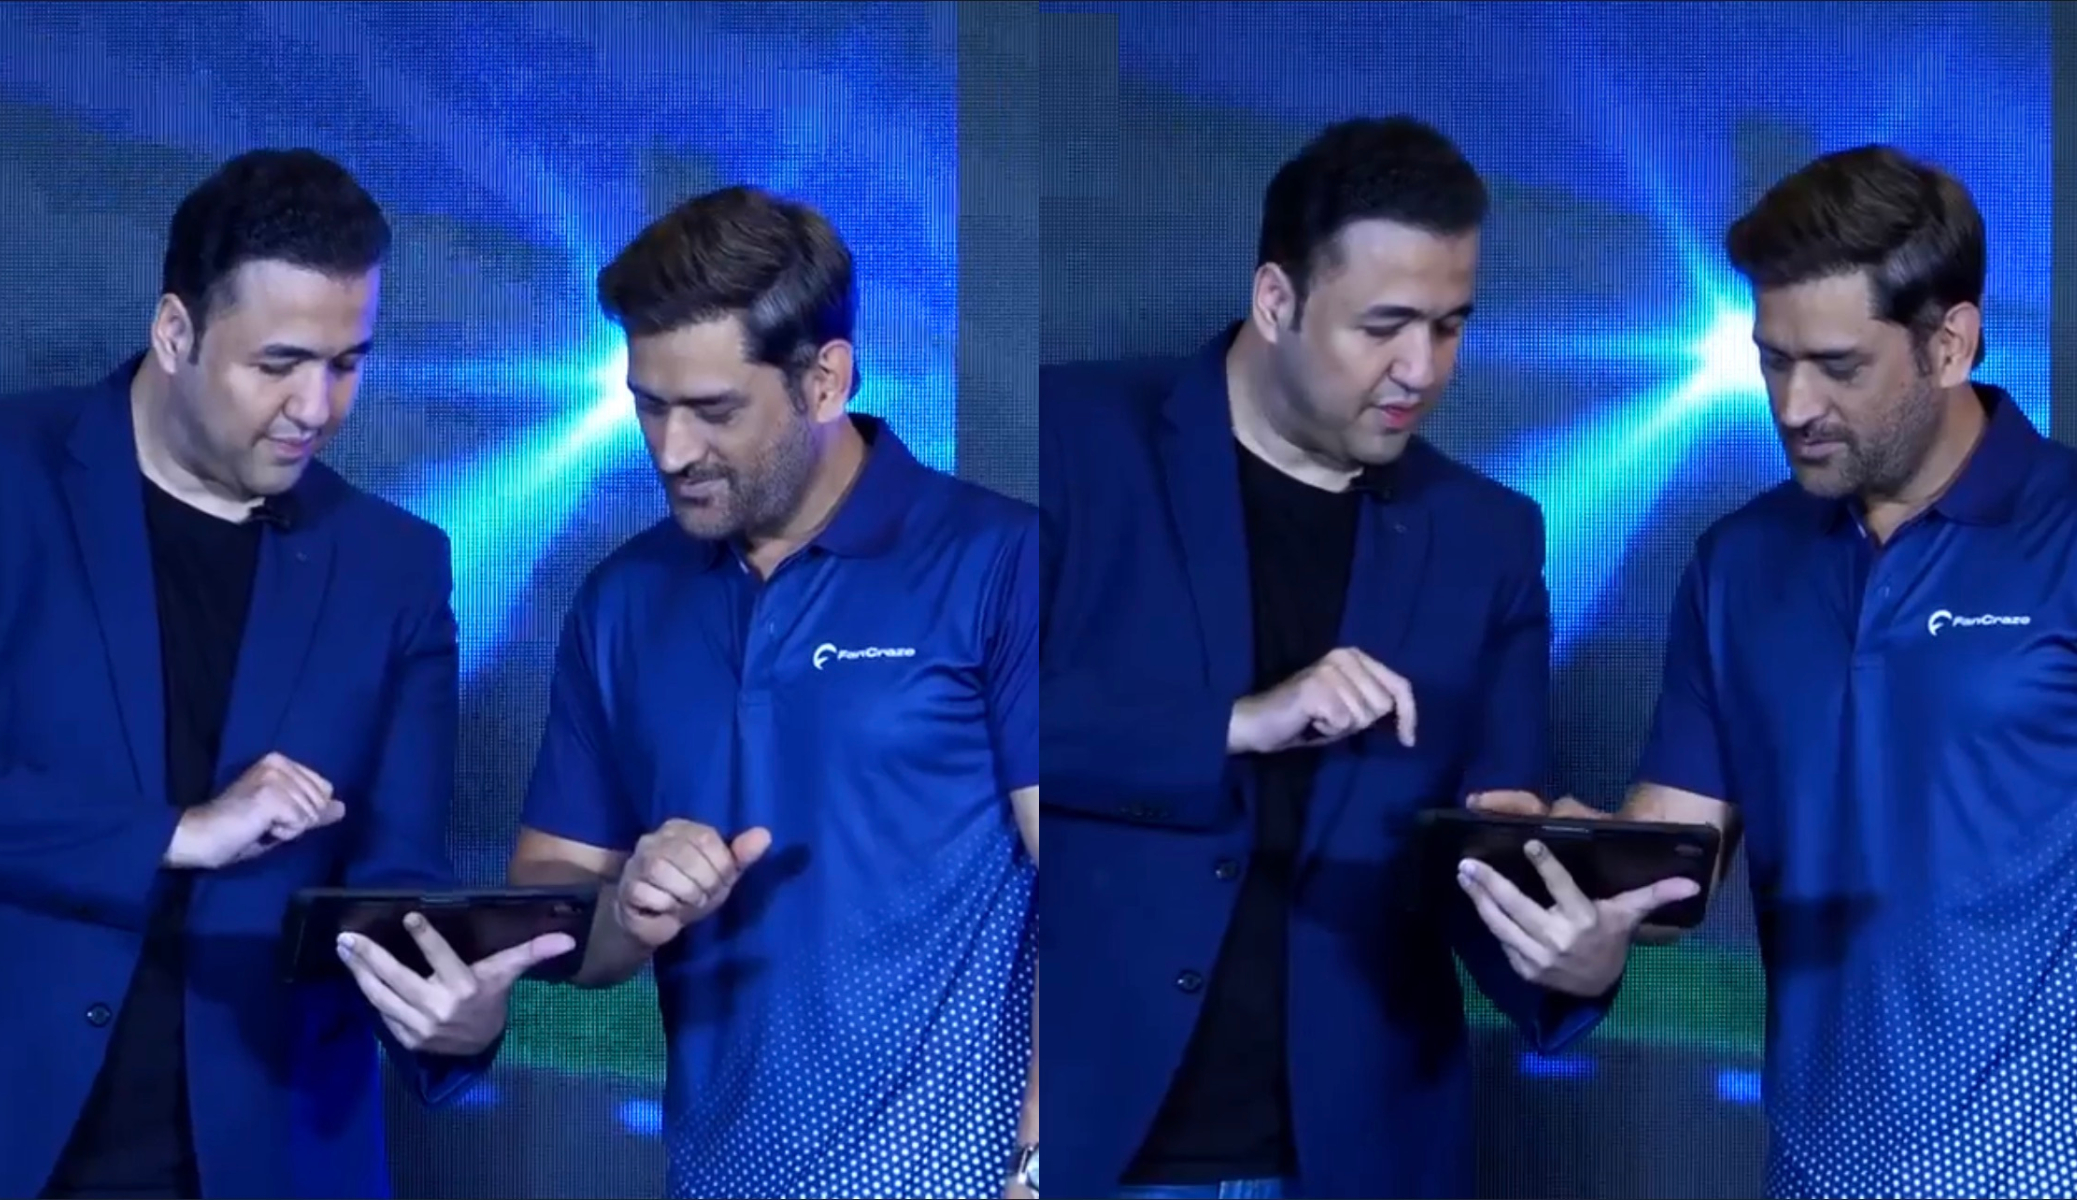 MS Dhoni during the event | Twitter